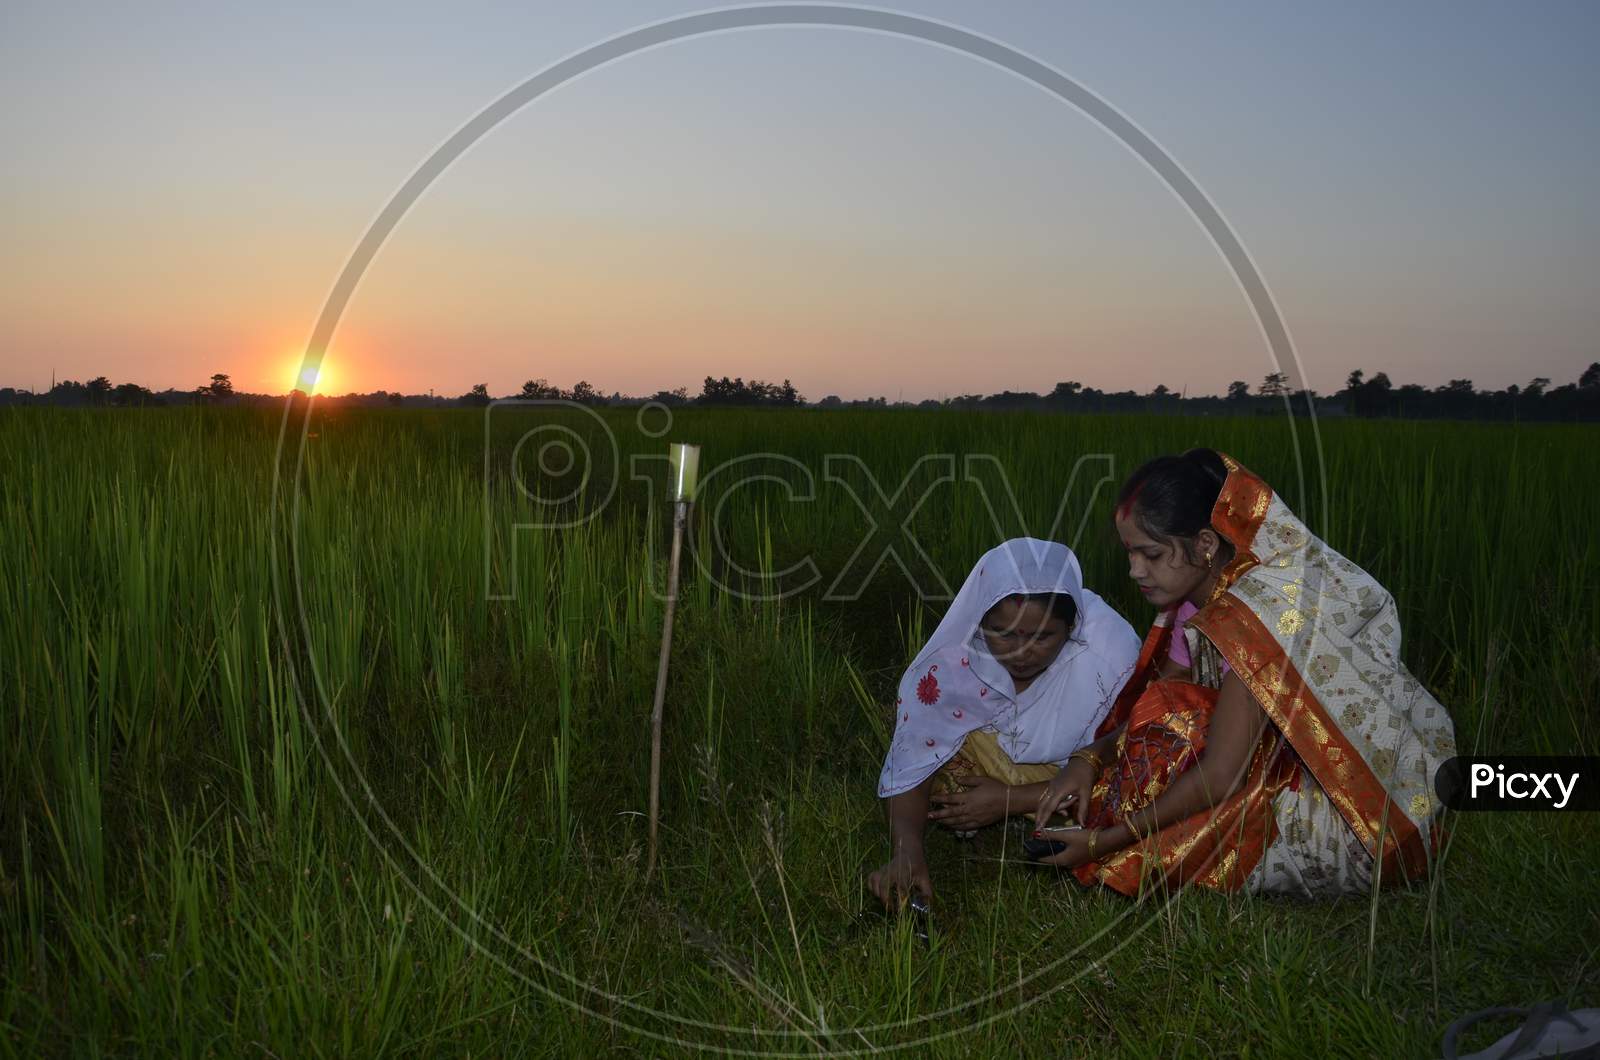 Assamese Farmers Celebrating Kati Bihu Festival To Ensure Strong Growth And Healthy Crop  In The Month on Kati in Nagaon, Assam